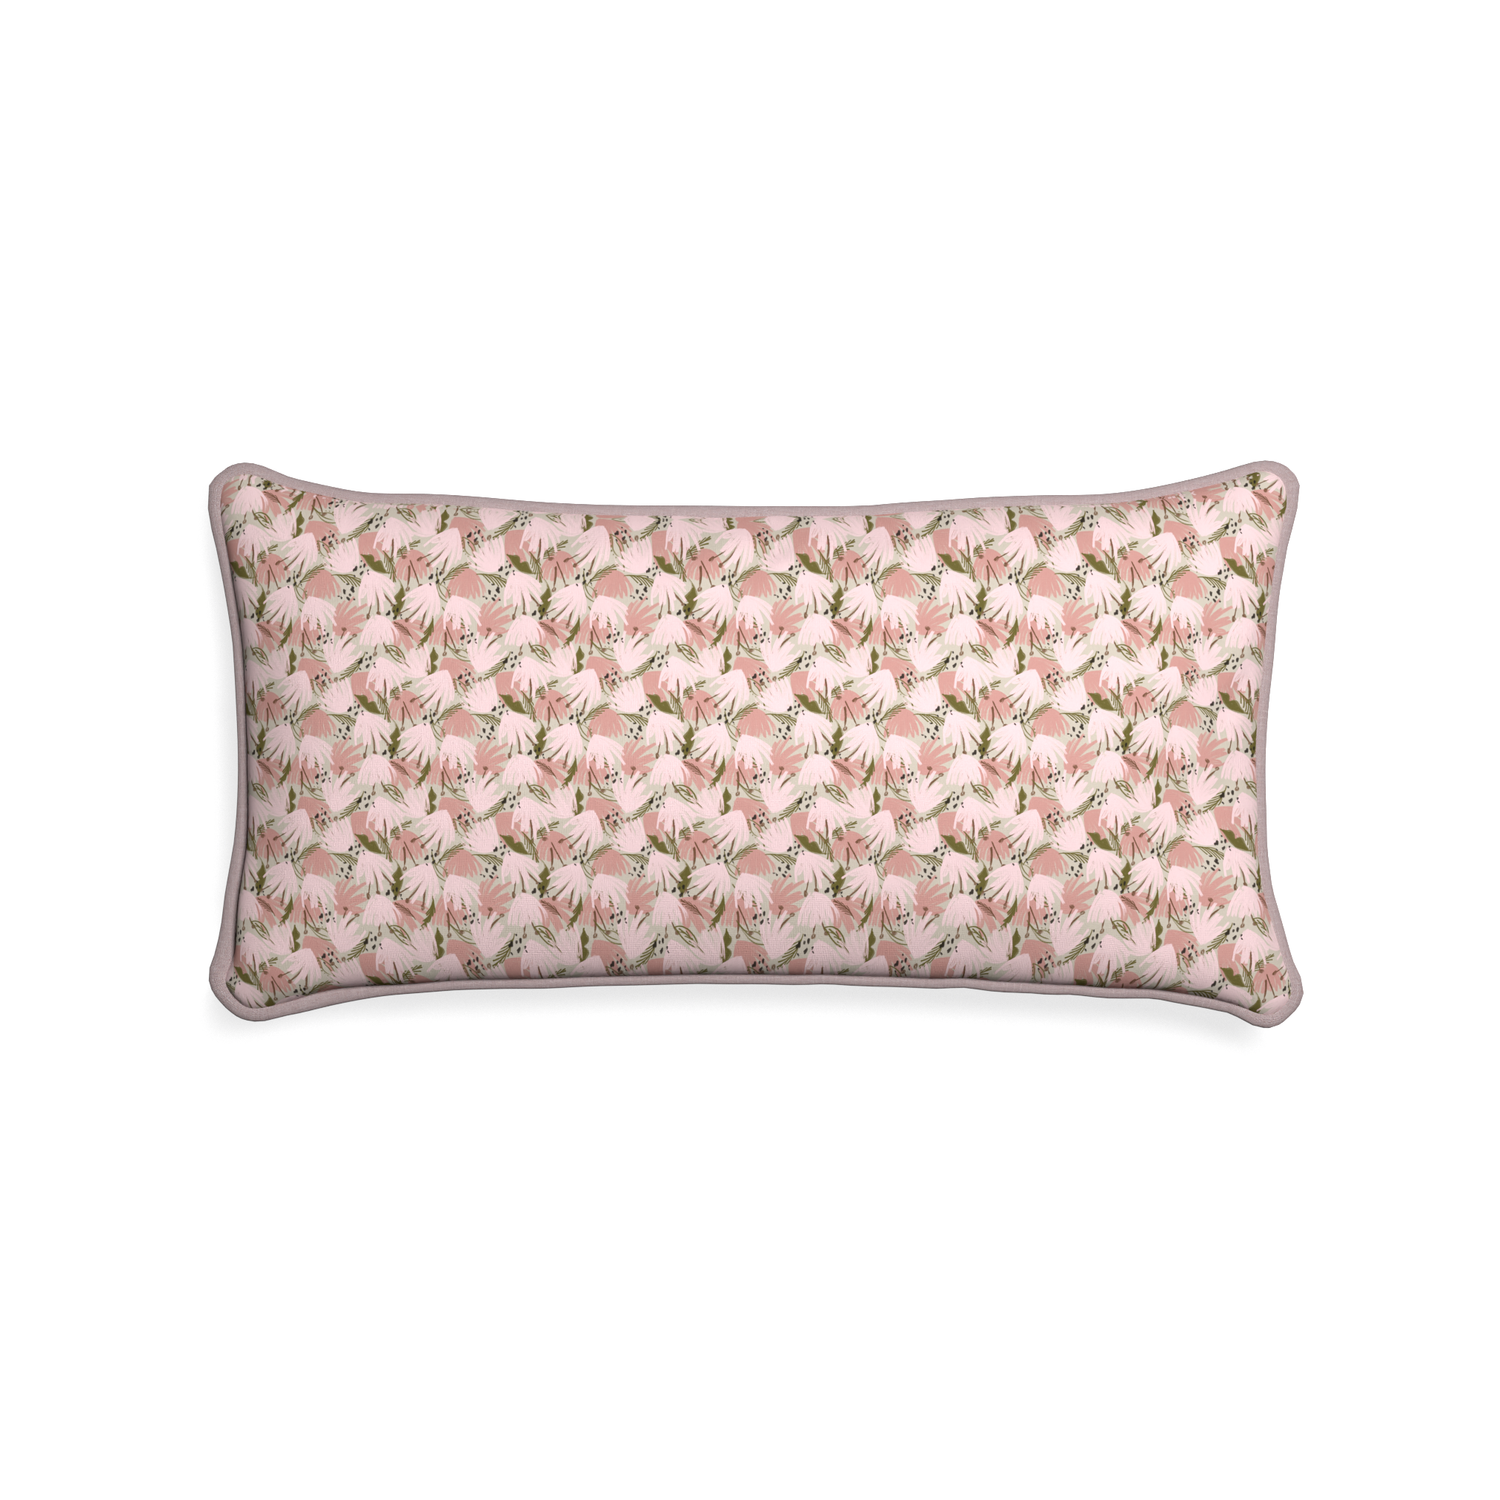 Midi-lumbar eden pink custom pink floralpillow with orchid piping on white background